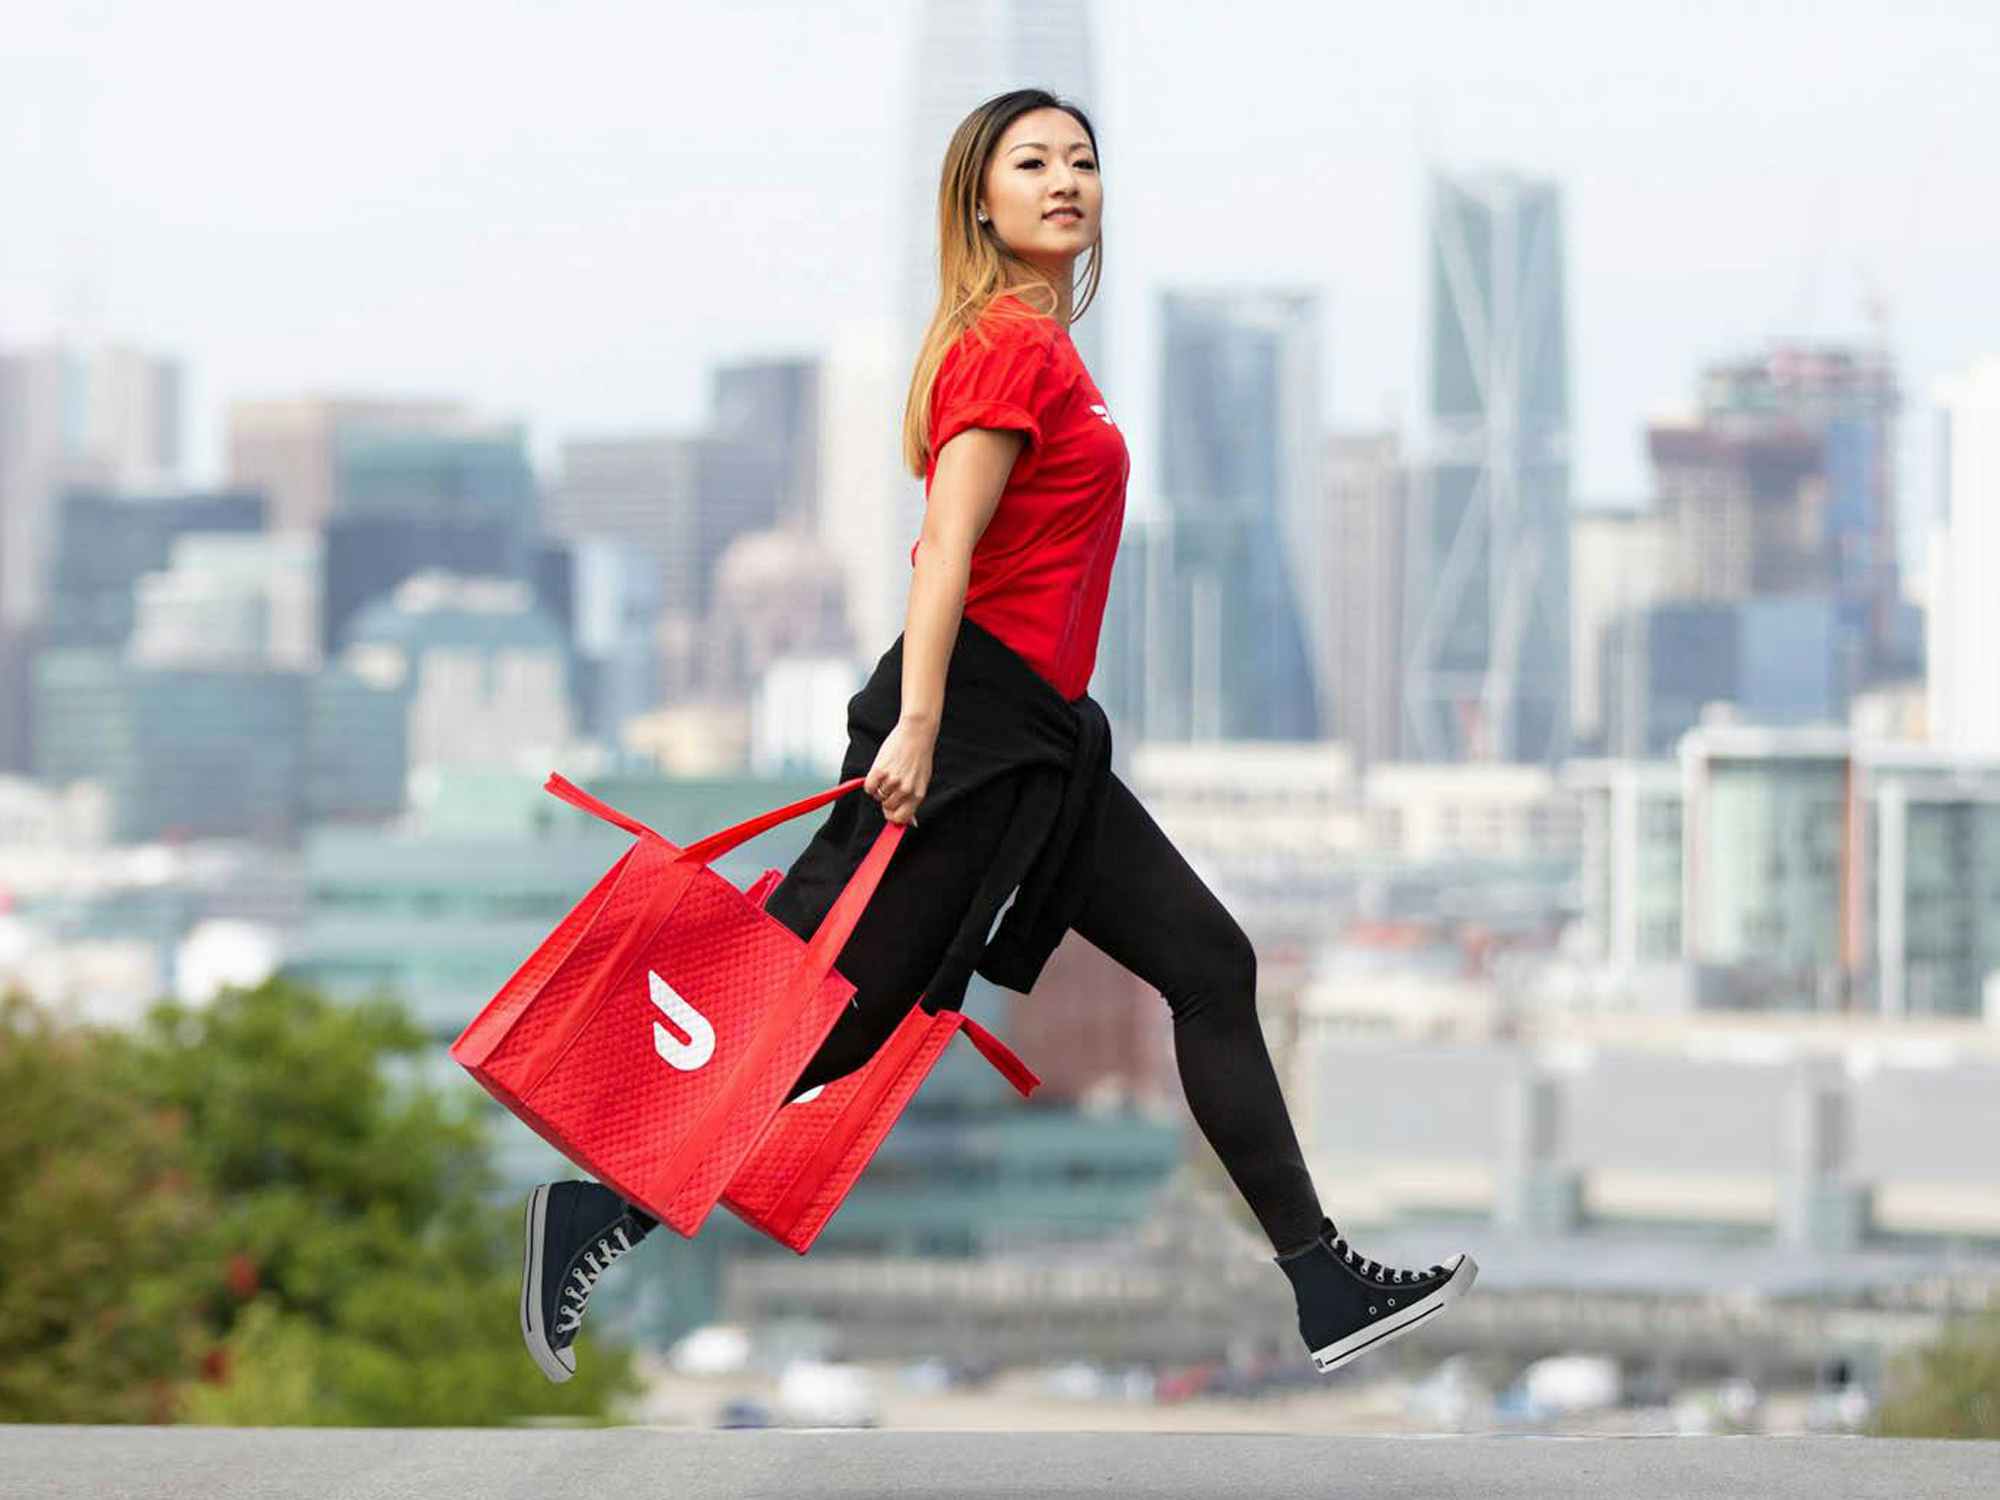 person carrying doordash bags in city